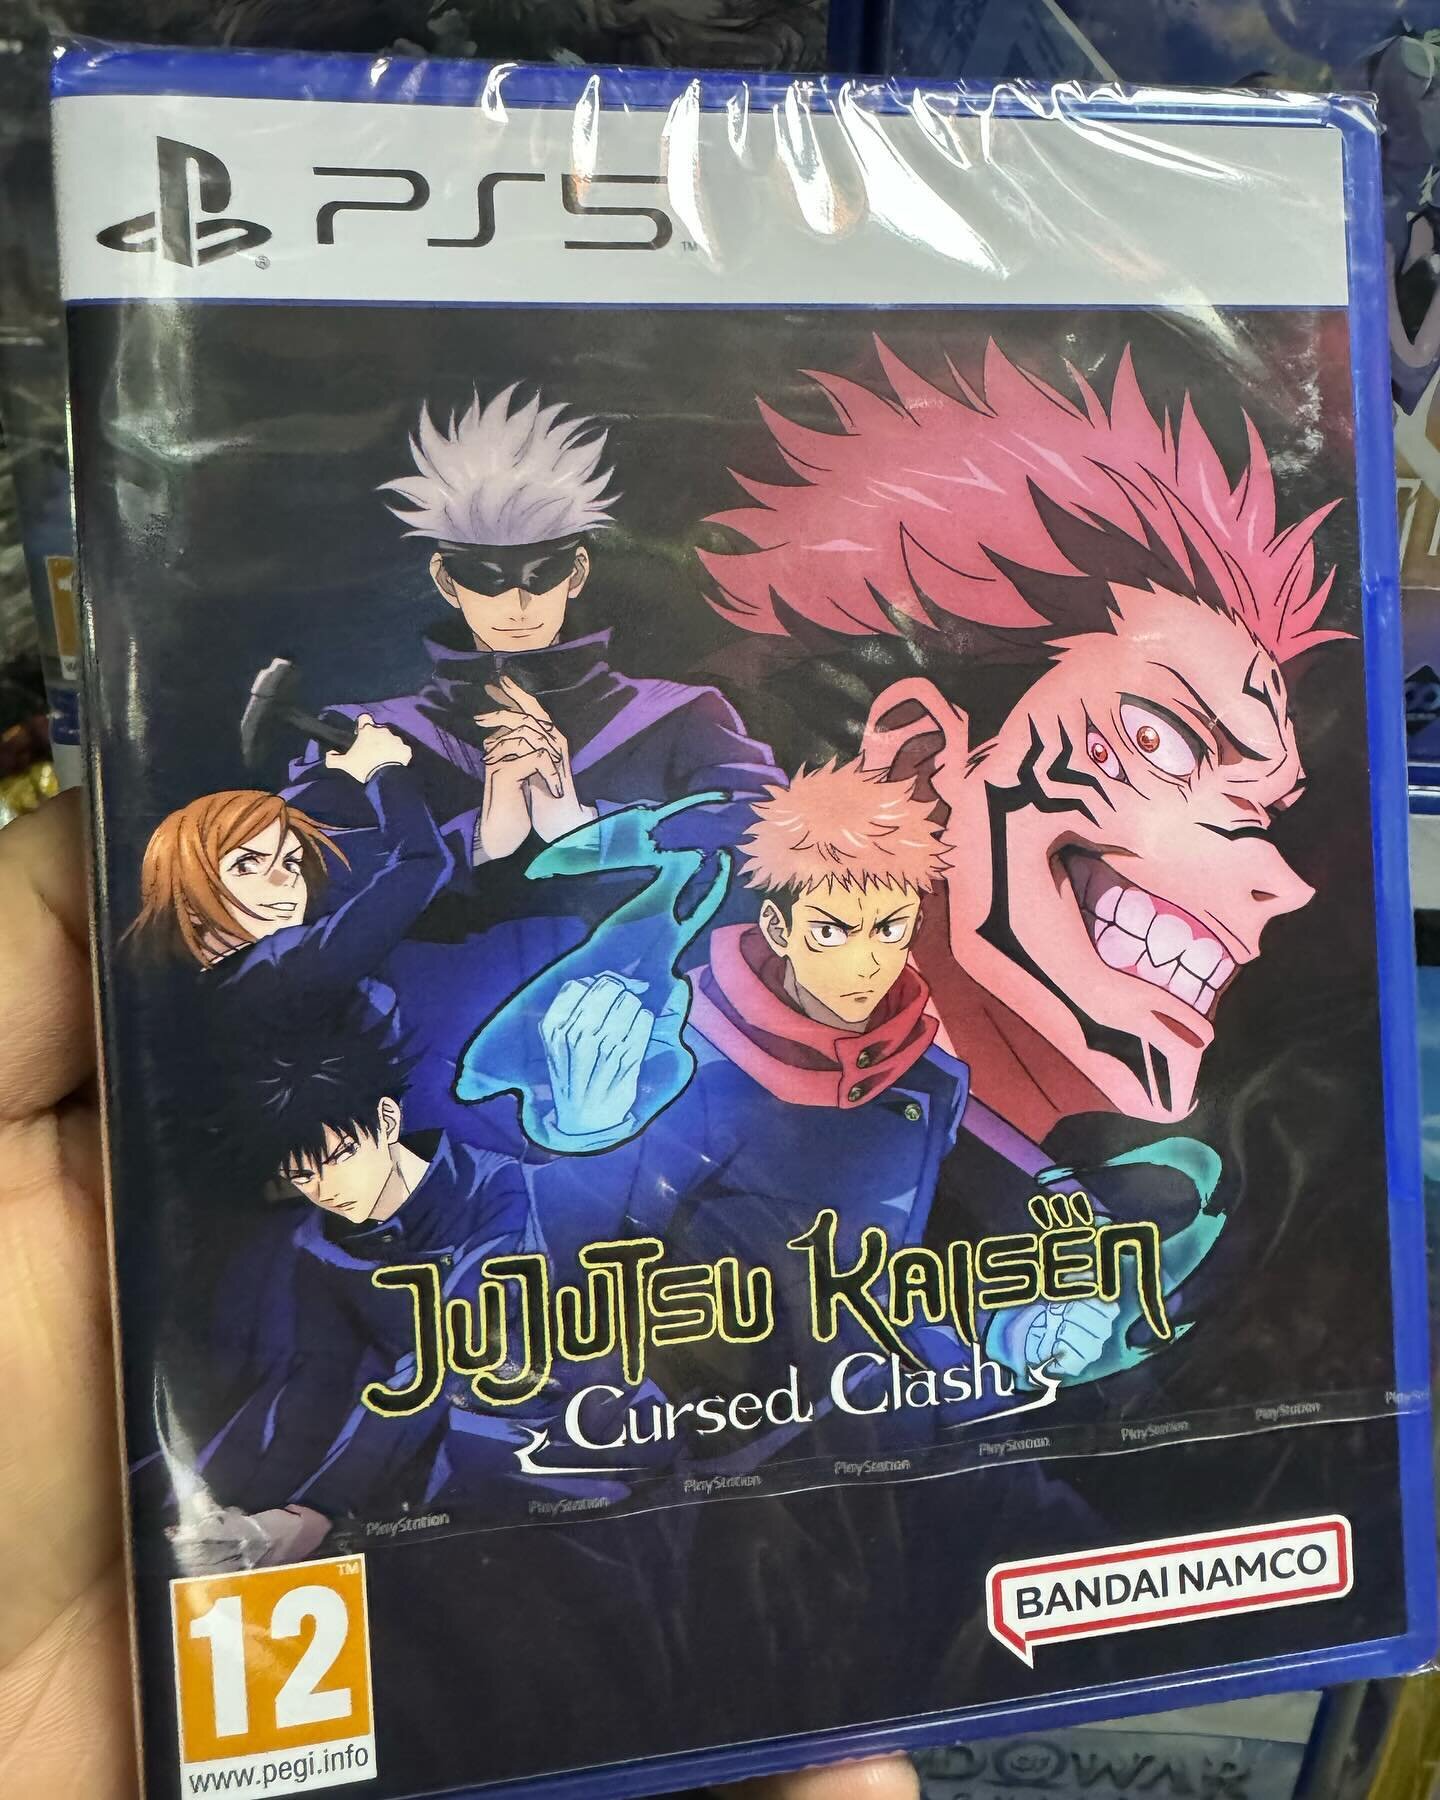 All new Jujutsu Kaisen Cursed Clash in store now on PS5